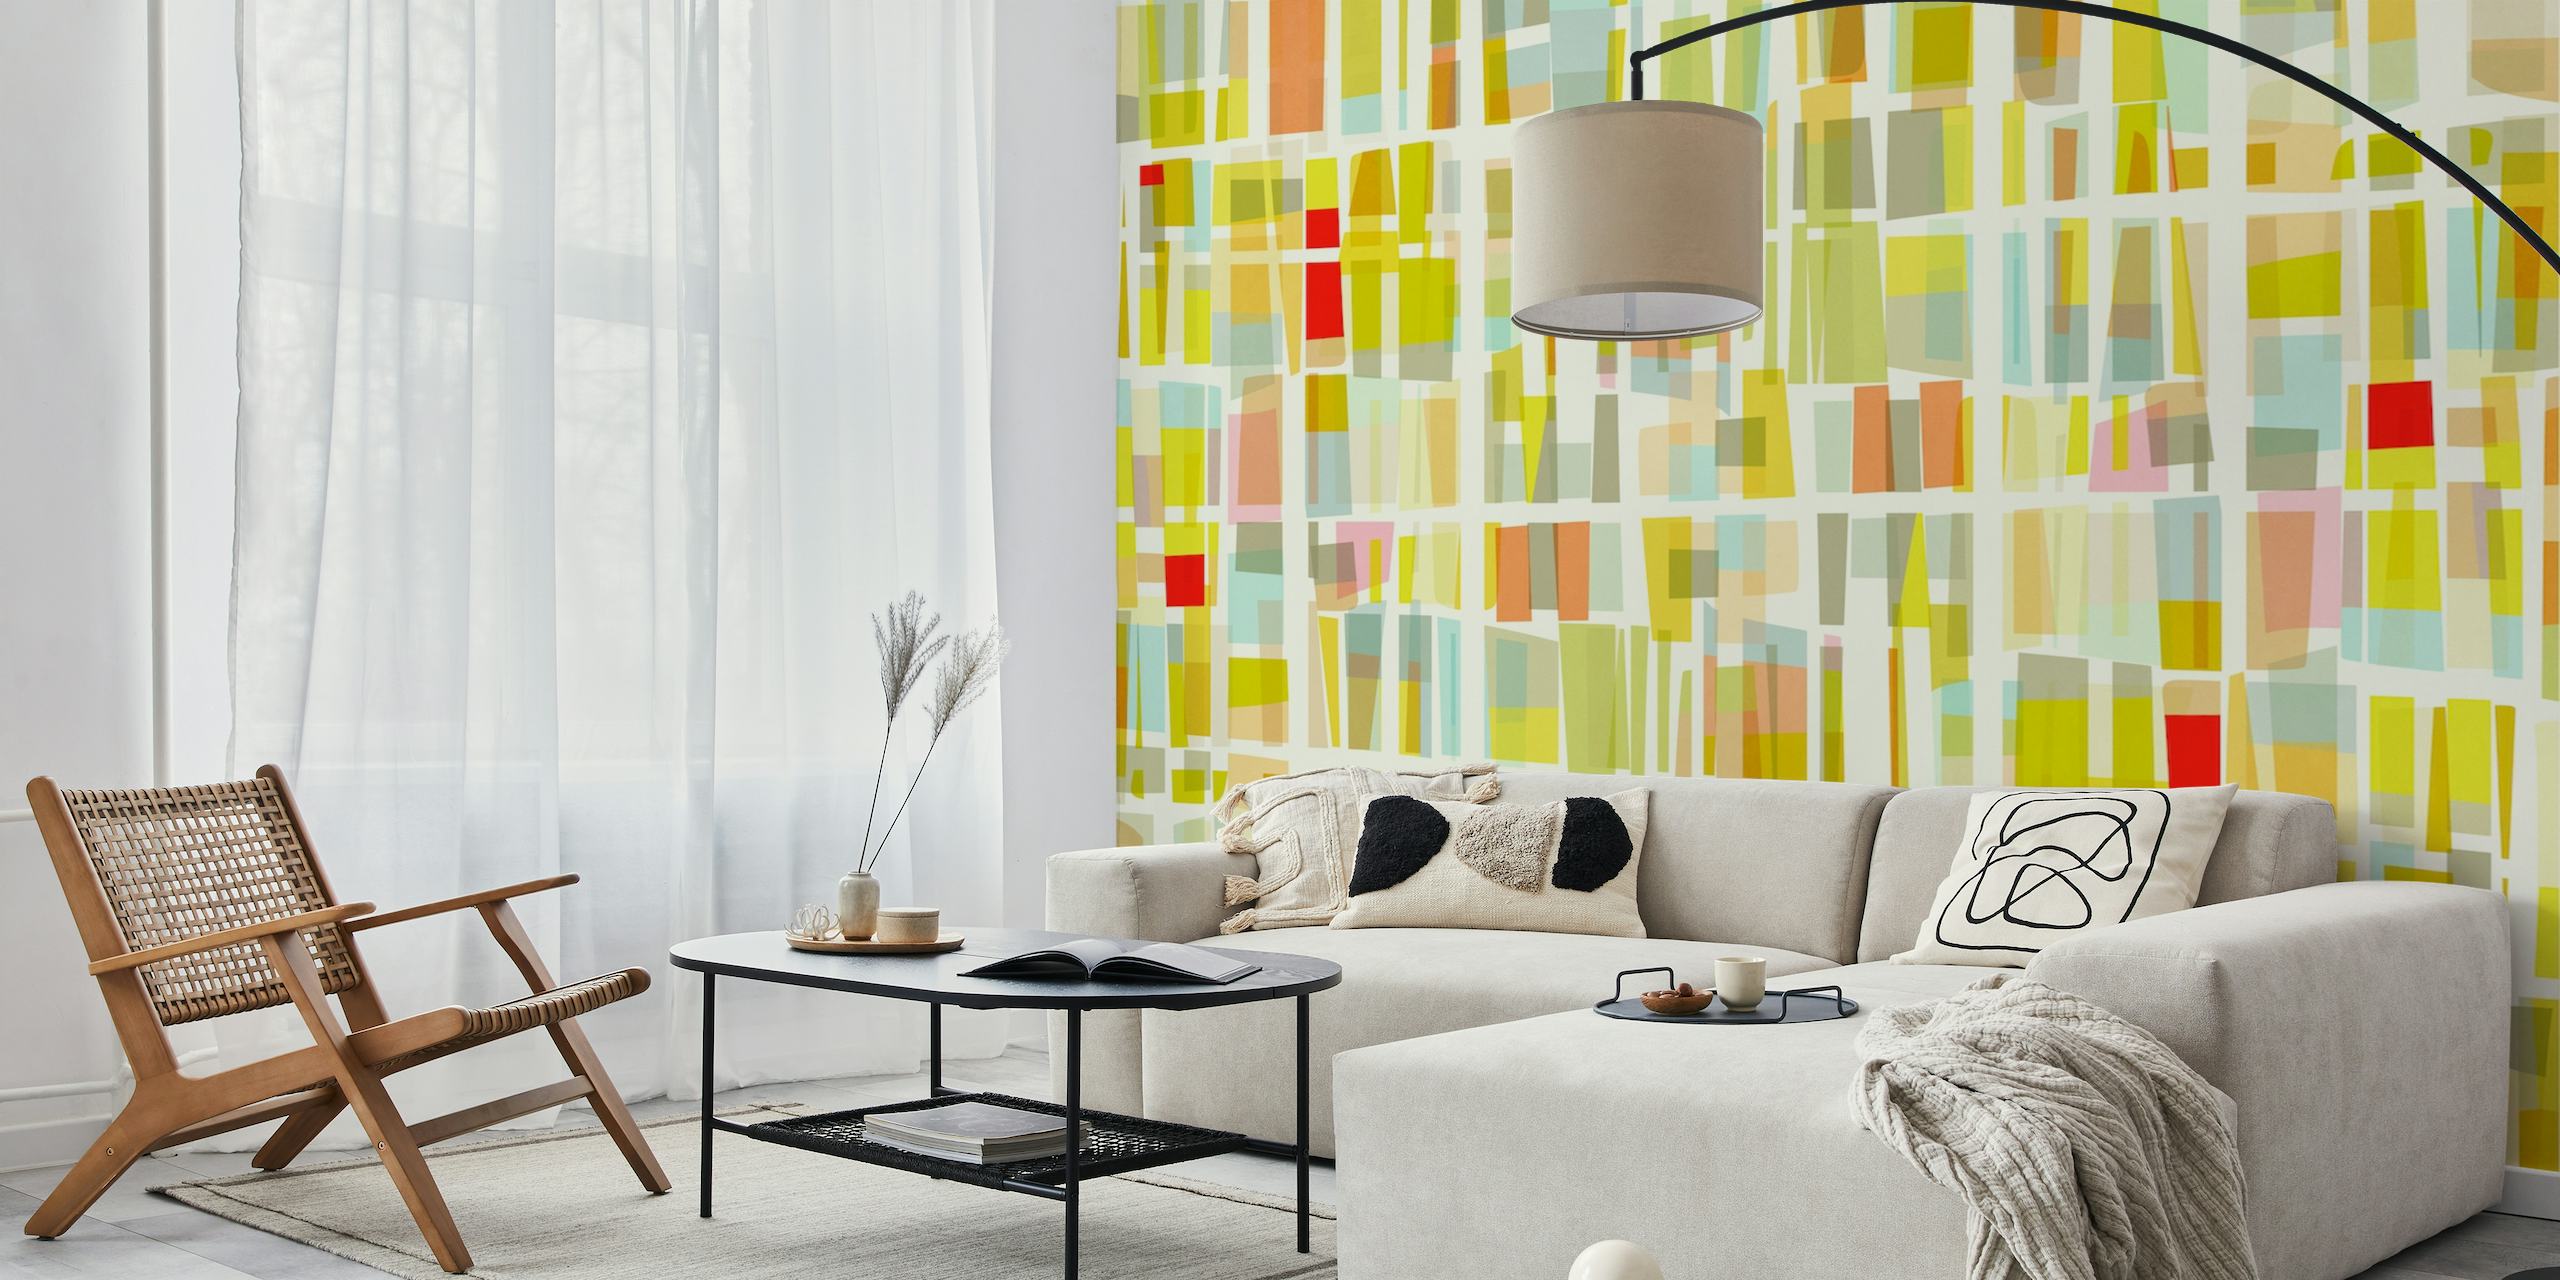 Abstract yellow, green, and red square pattern wall mural